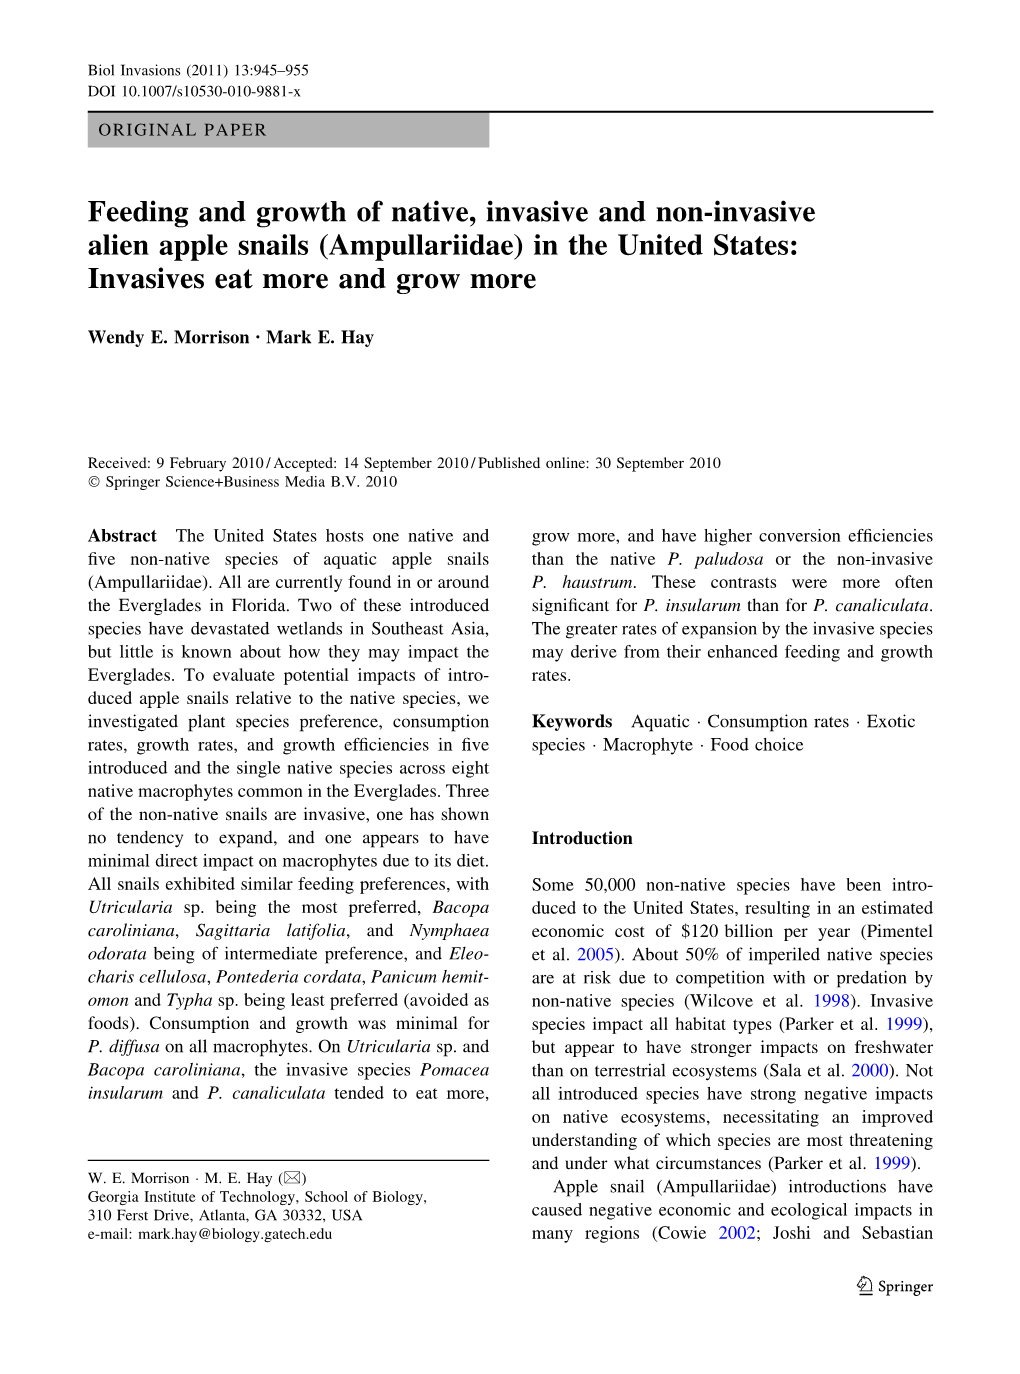 Feeding and Growth of Native, Invasive and Non-Invasive Alien Apple Snails (Ampullariidae) in the United States: Invasives Eat More and Grow More